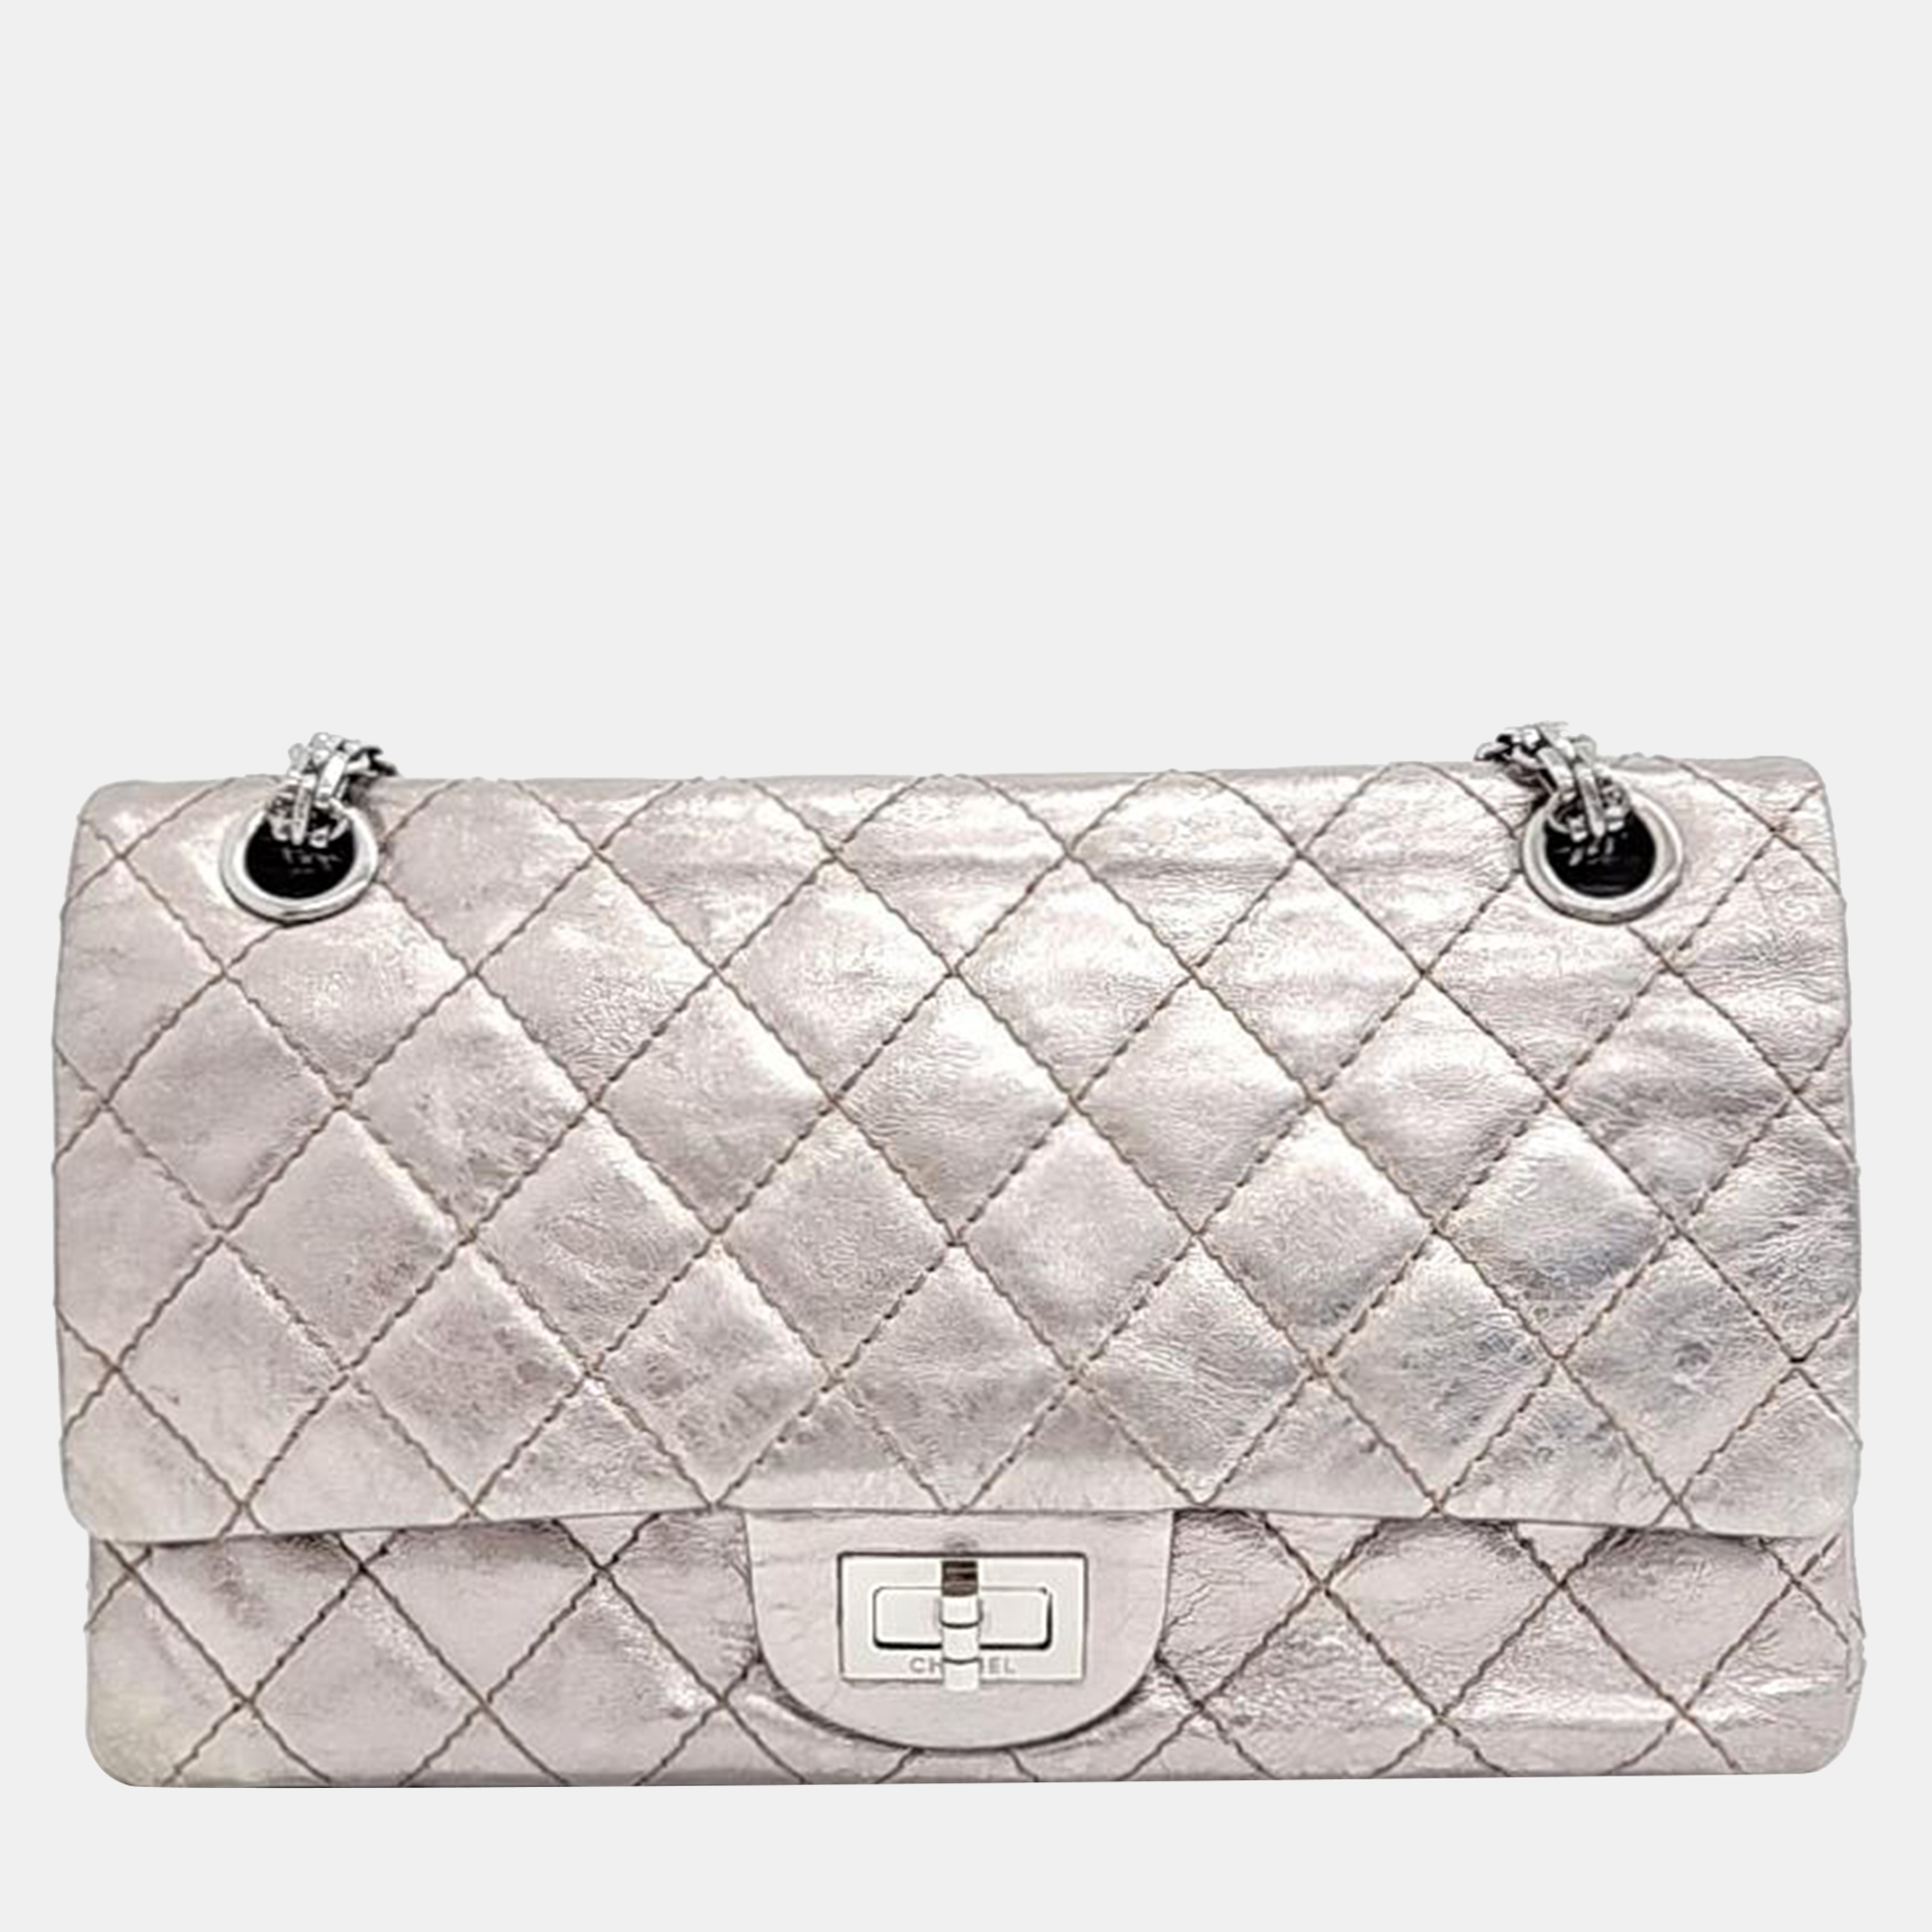 Chanel silver quilted crinkled leather reissue 2.55 classic 227 double flap bag